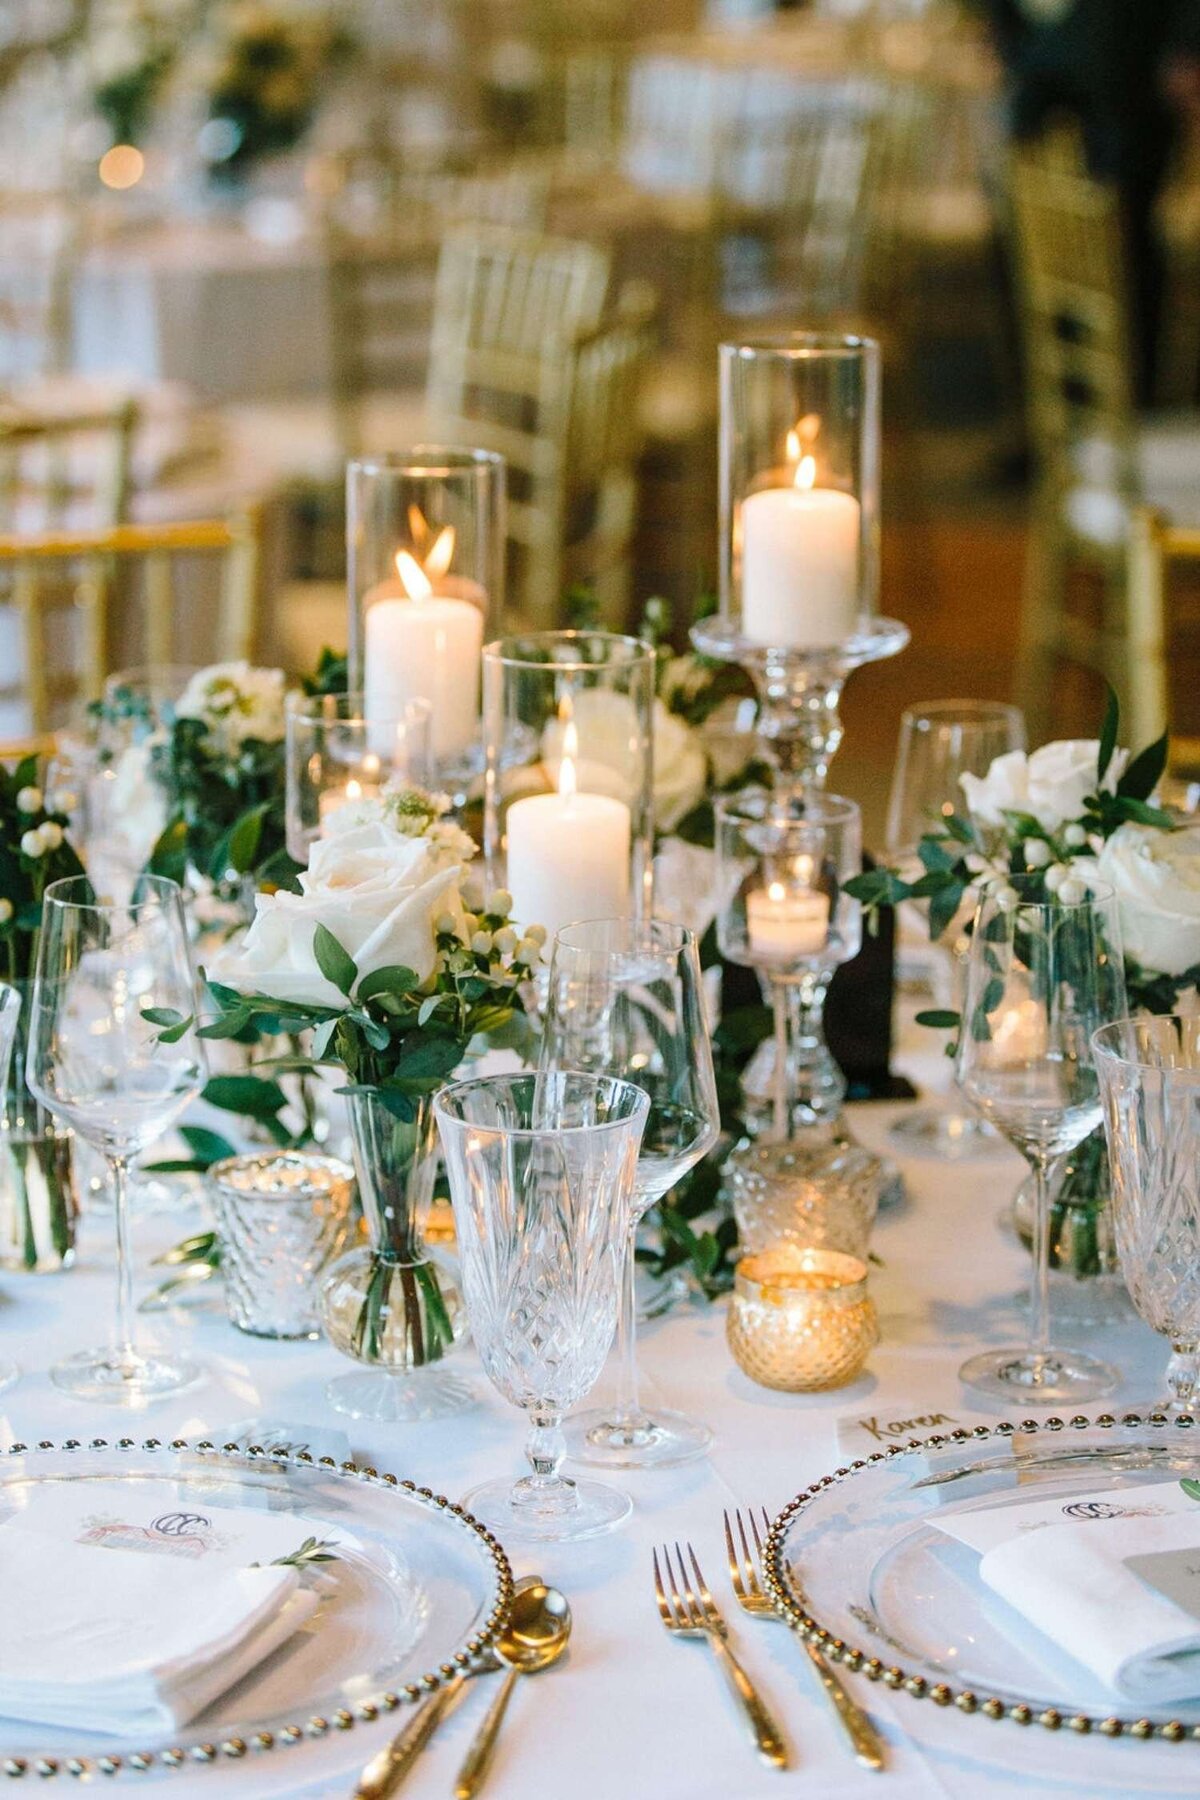 Classic and Elegant Placesetting with Gold Flat ware and Crystal Stemware for a Luxury Michigan Lakefront Golf Club Wedding.